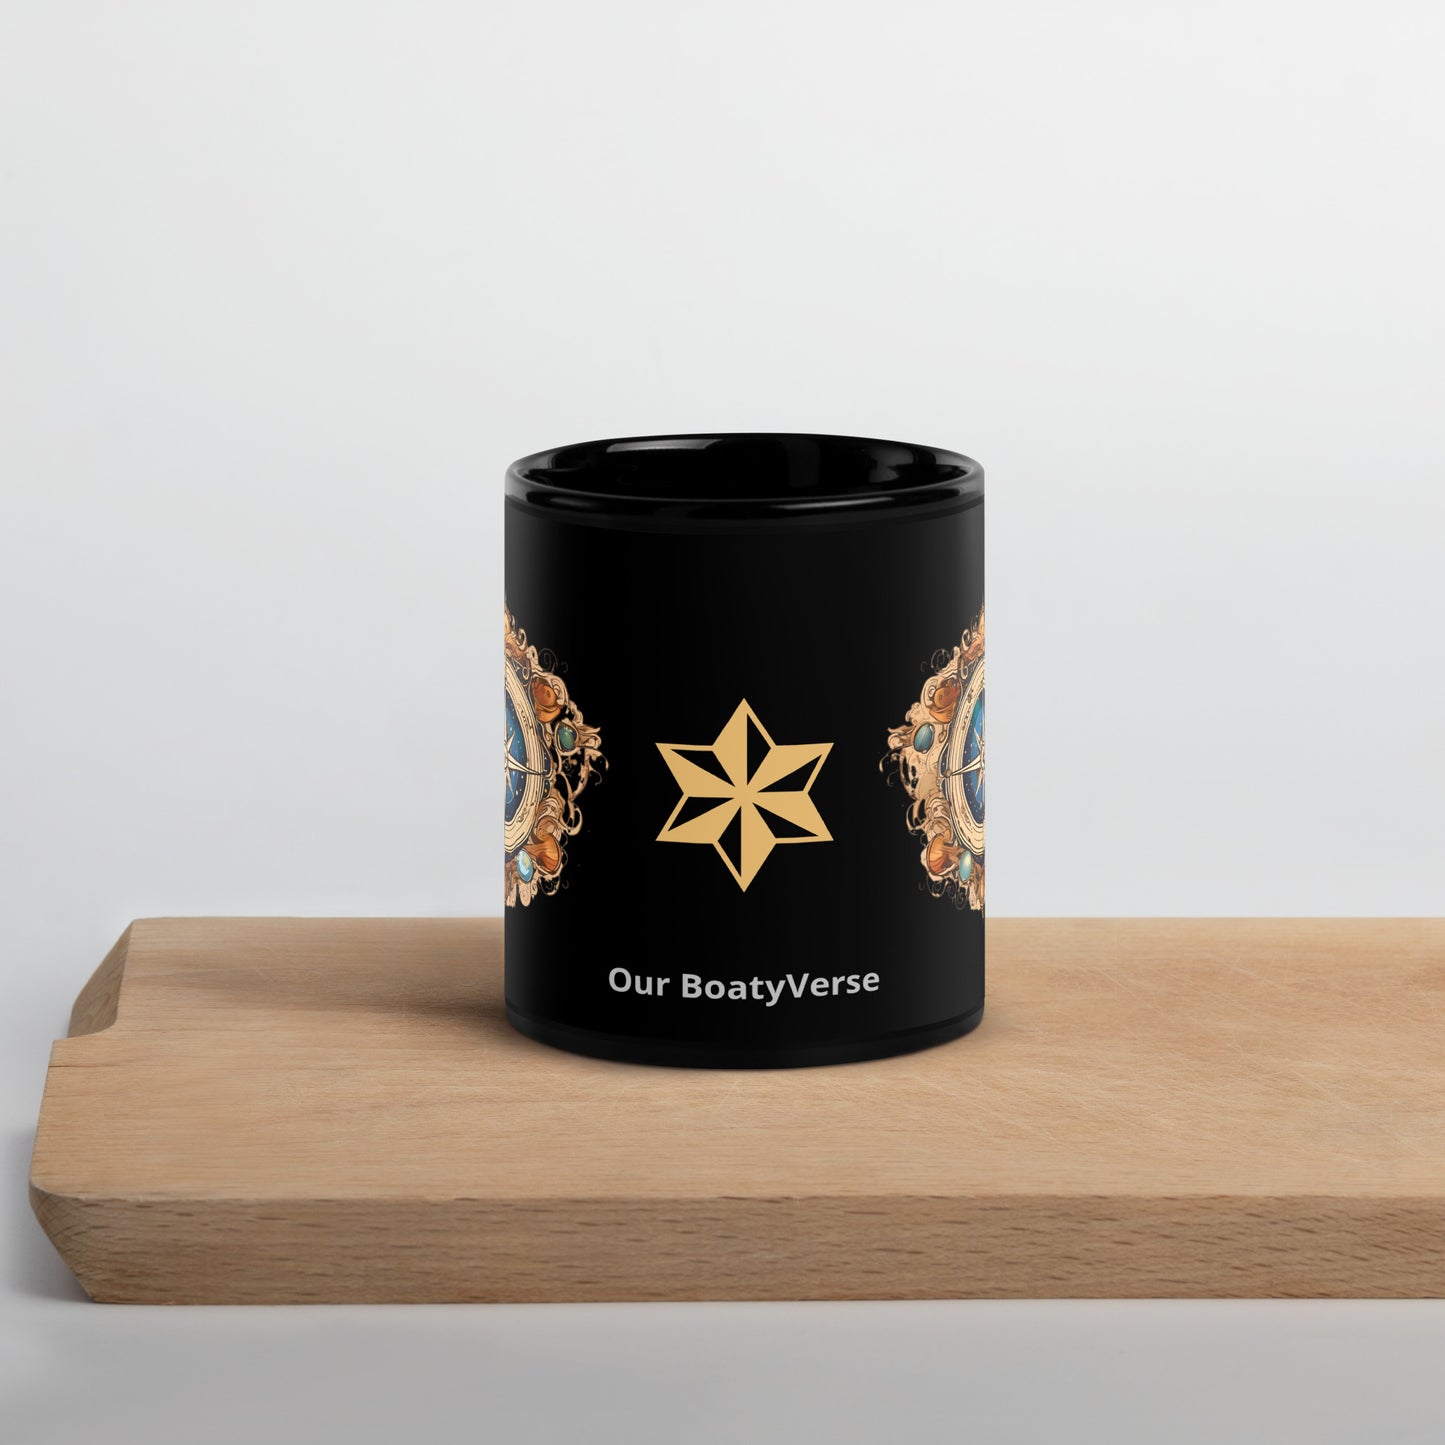 The Compass Black Glossy Mug by Our BoatyVerse